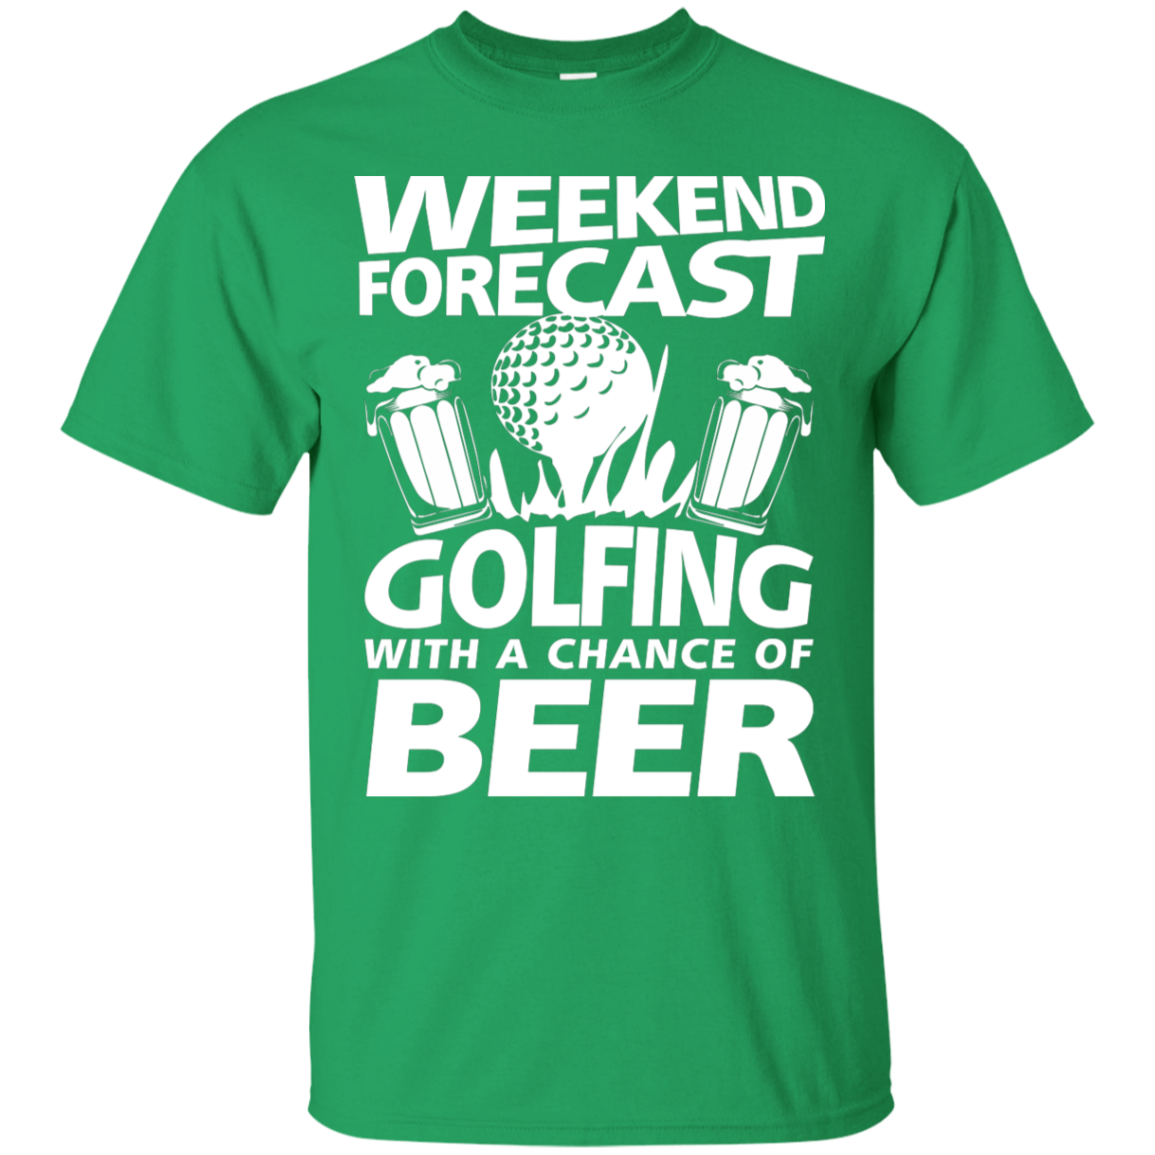 Weekend Forecast Golfing With A Chance Of Beer T-Shirt Apparel - The Beer Lodge